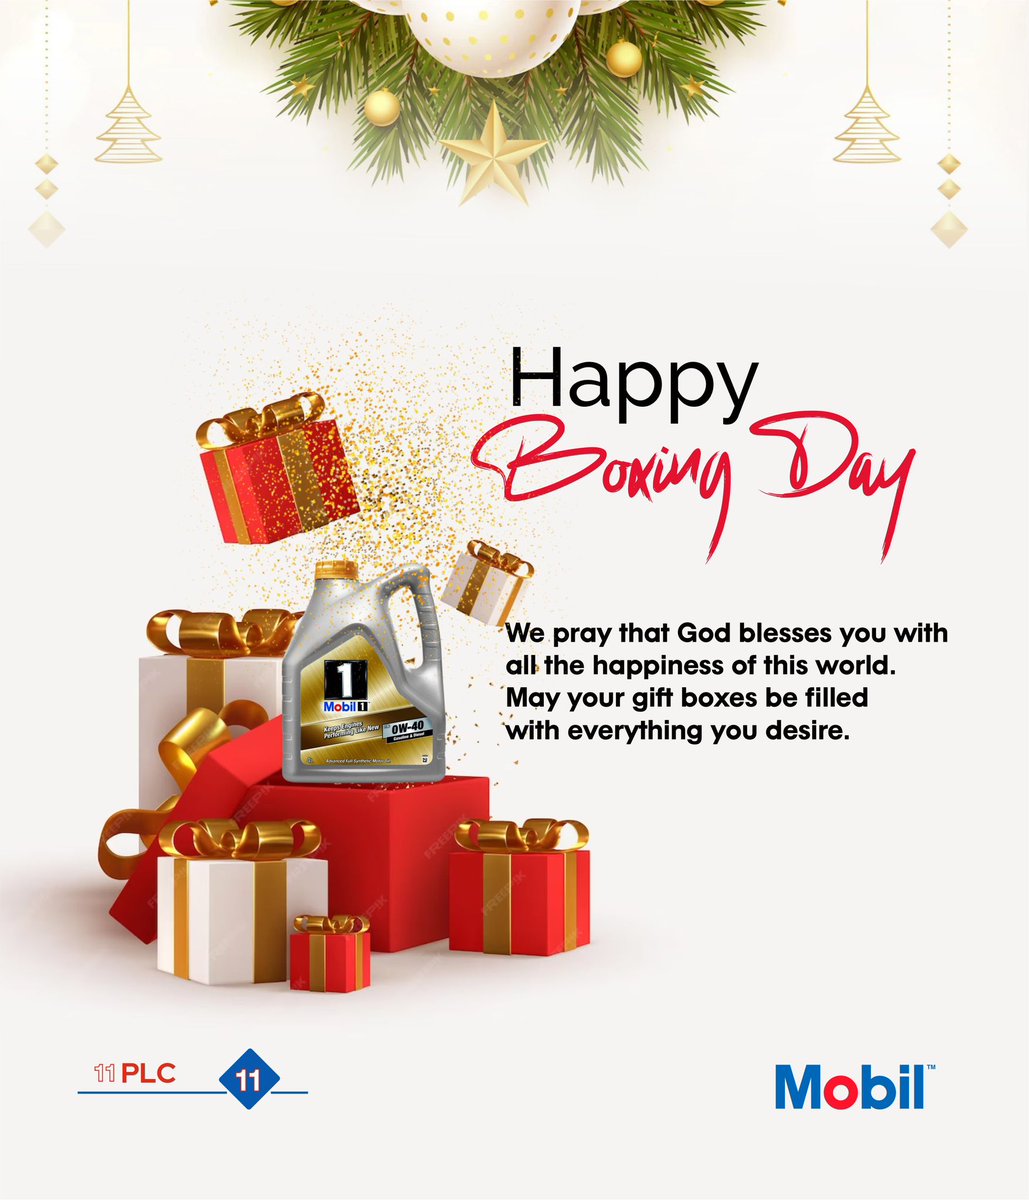 Happy Boxing Day! May it bring peace to all those around you. Enjoy your with loved ones 

#boxingday #mobillubricantes #mobilengineoil #mobilsuperoil #festiveperiod